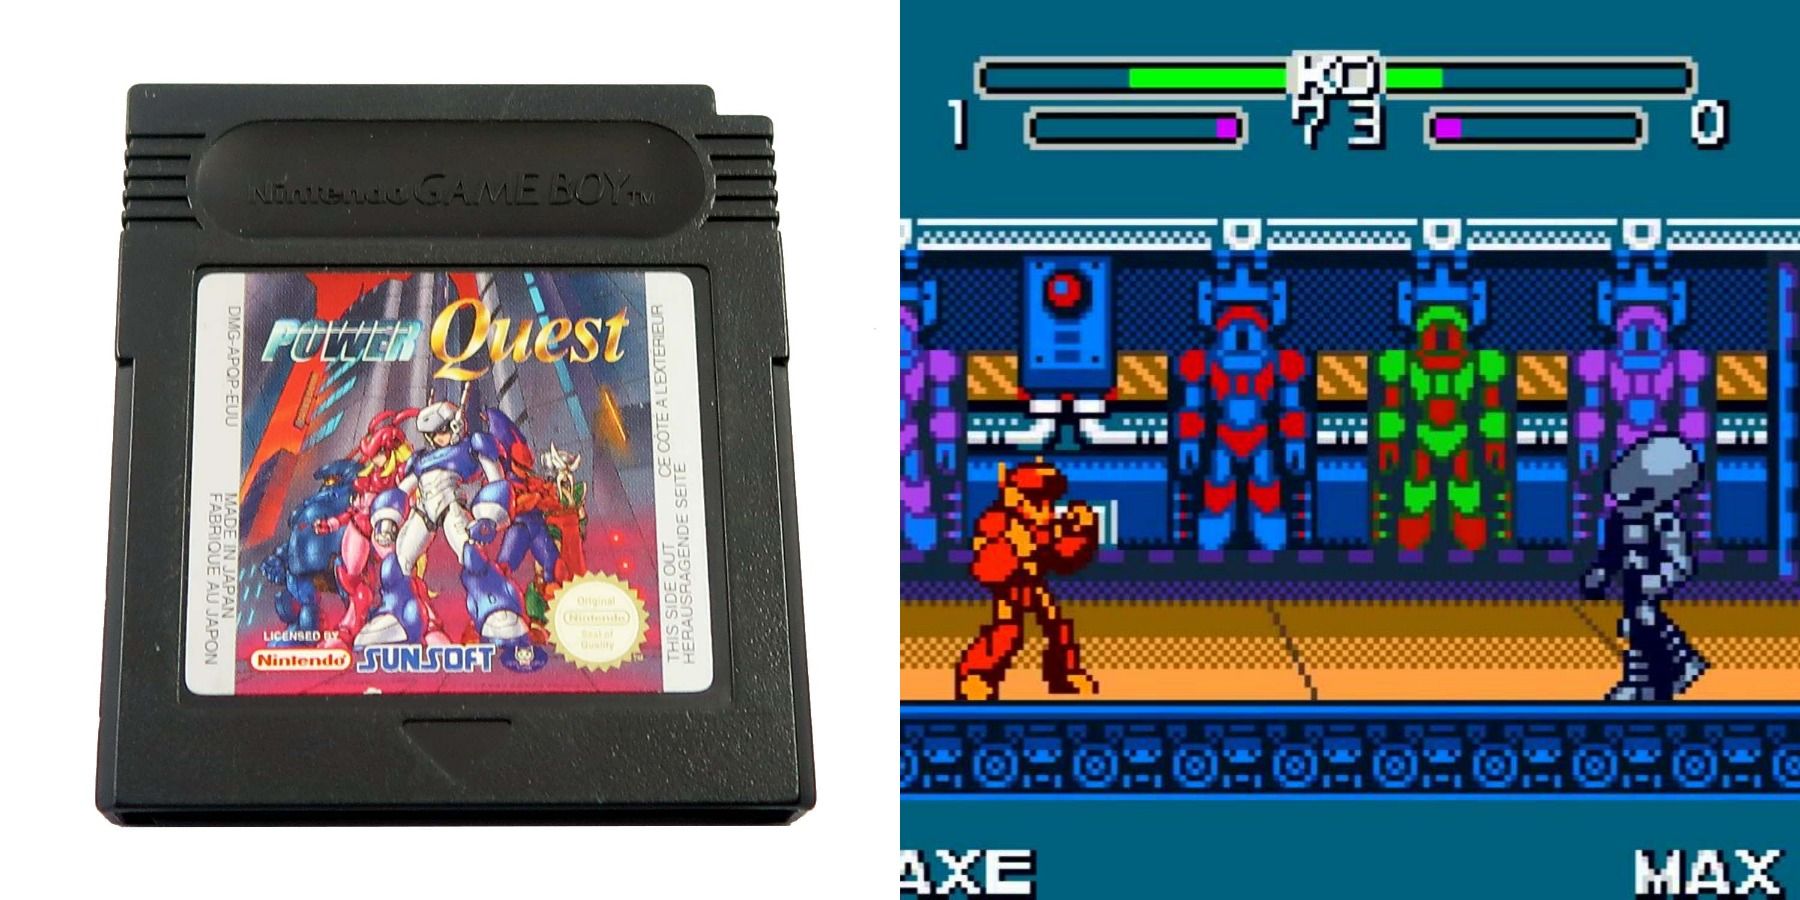 Power Quest GBC game and fighting robots